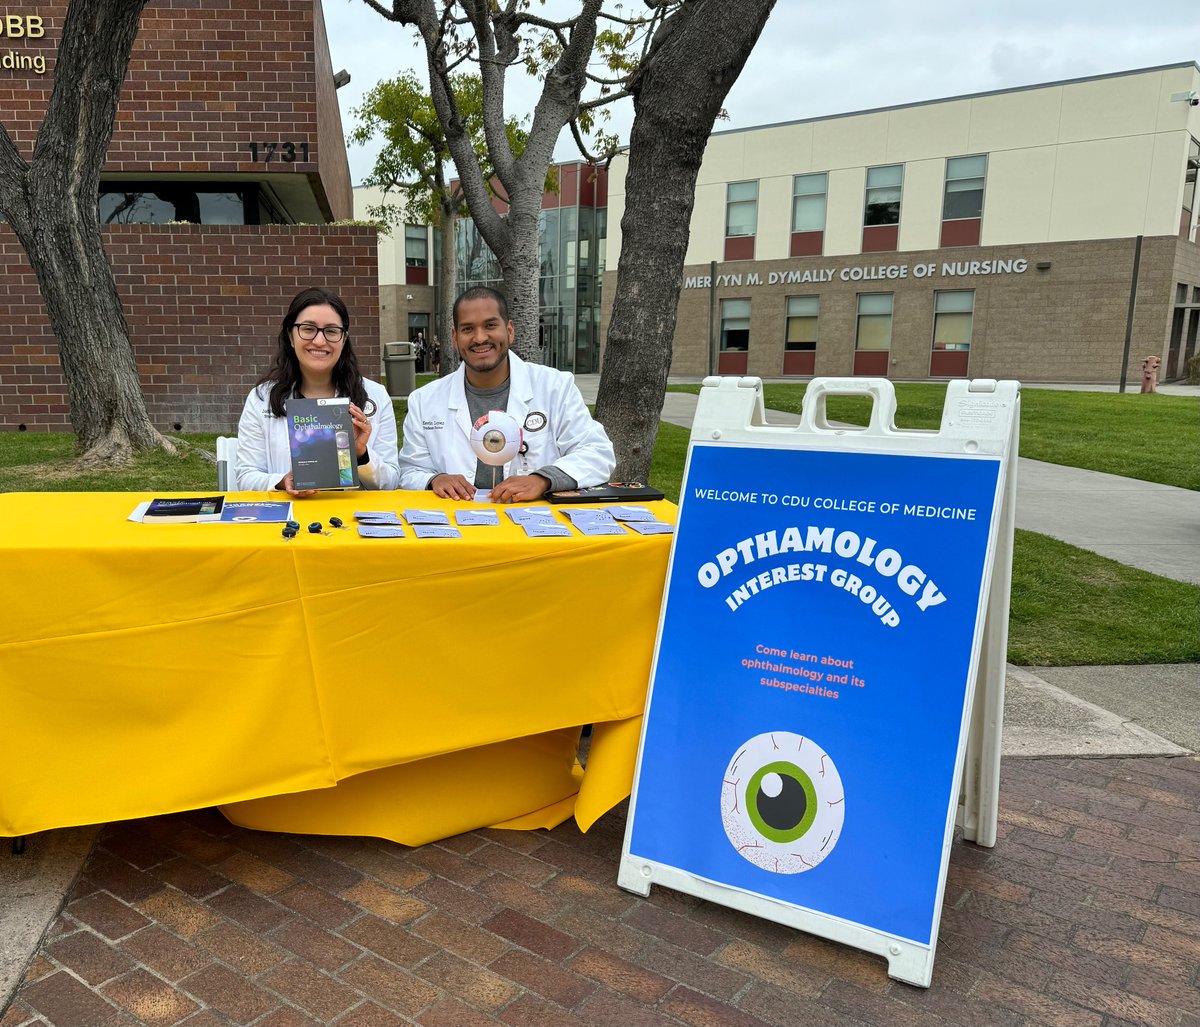 Honored to have co-founded @cdrewu Ophthalmology Interest group with Kevin Lopez. Today, we had the pleasure of meeting and being surrounded by so many incredible incoming applicants.